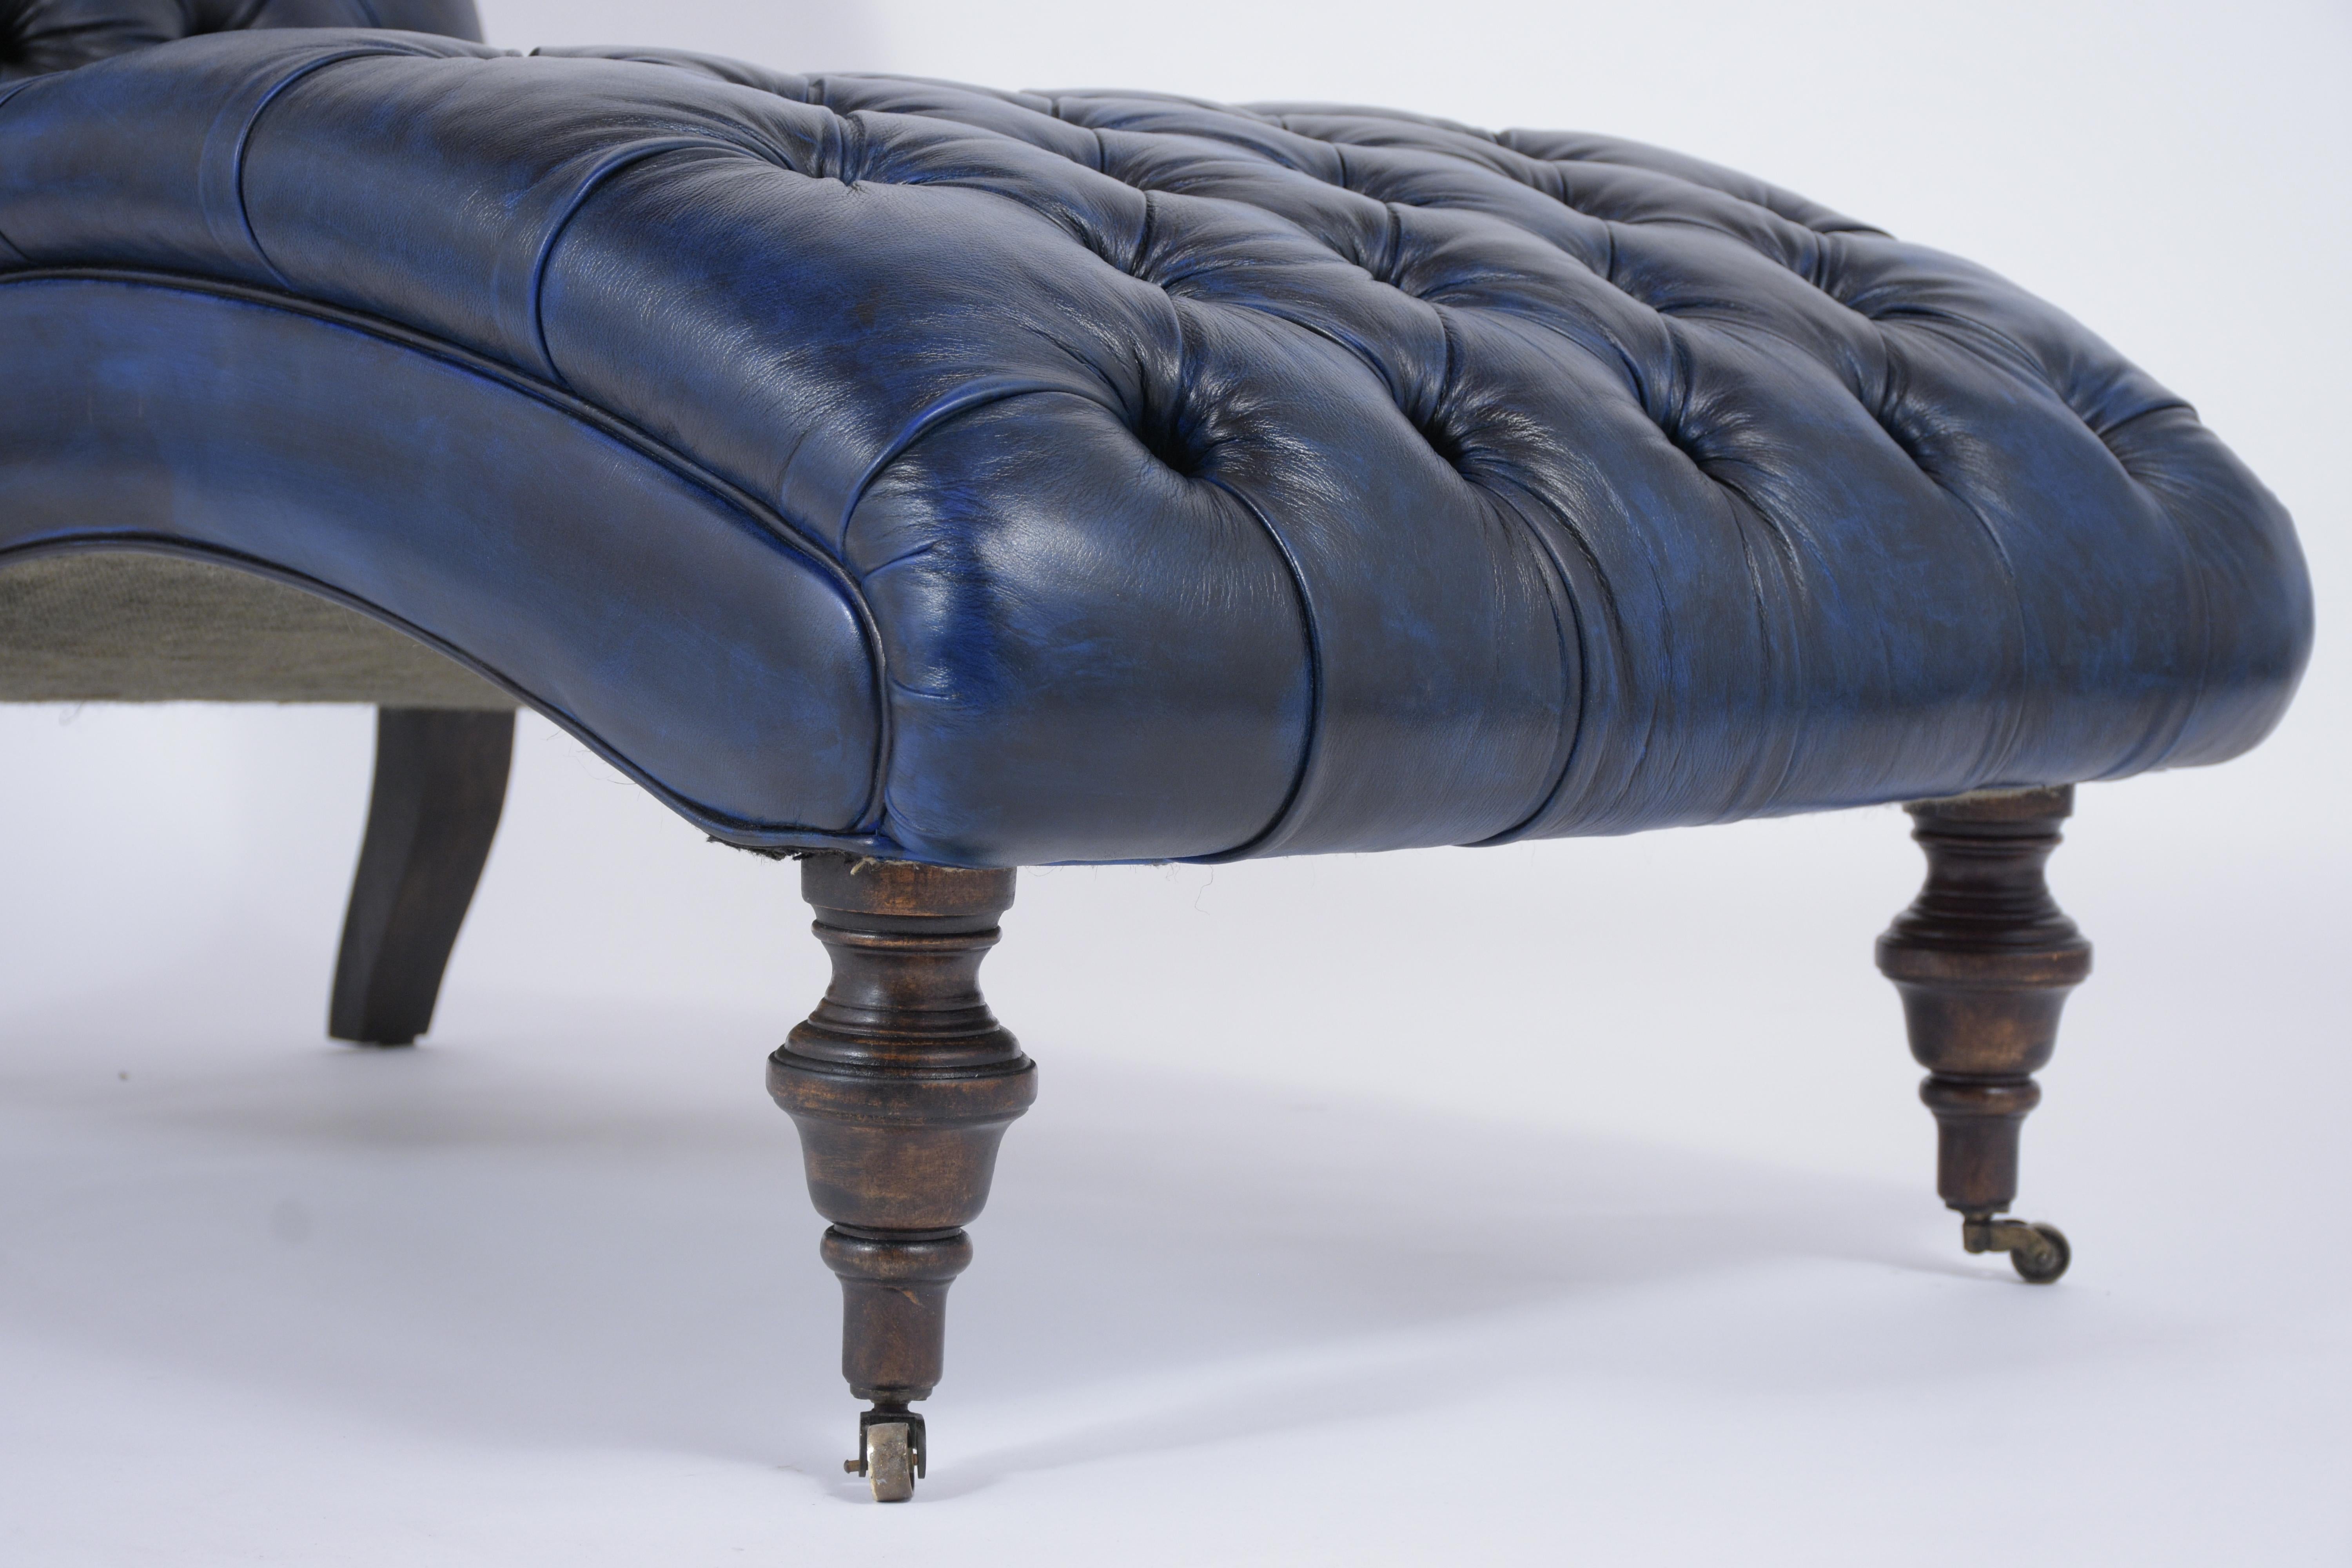 Carved Tufted Chaise Lounge